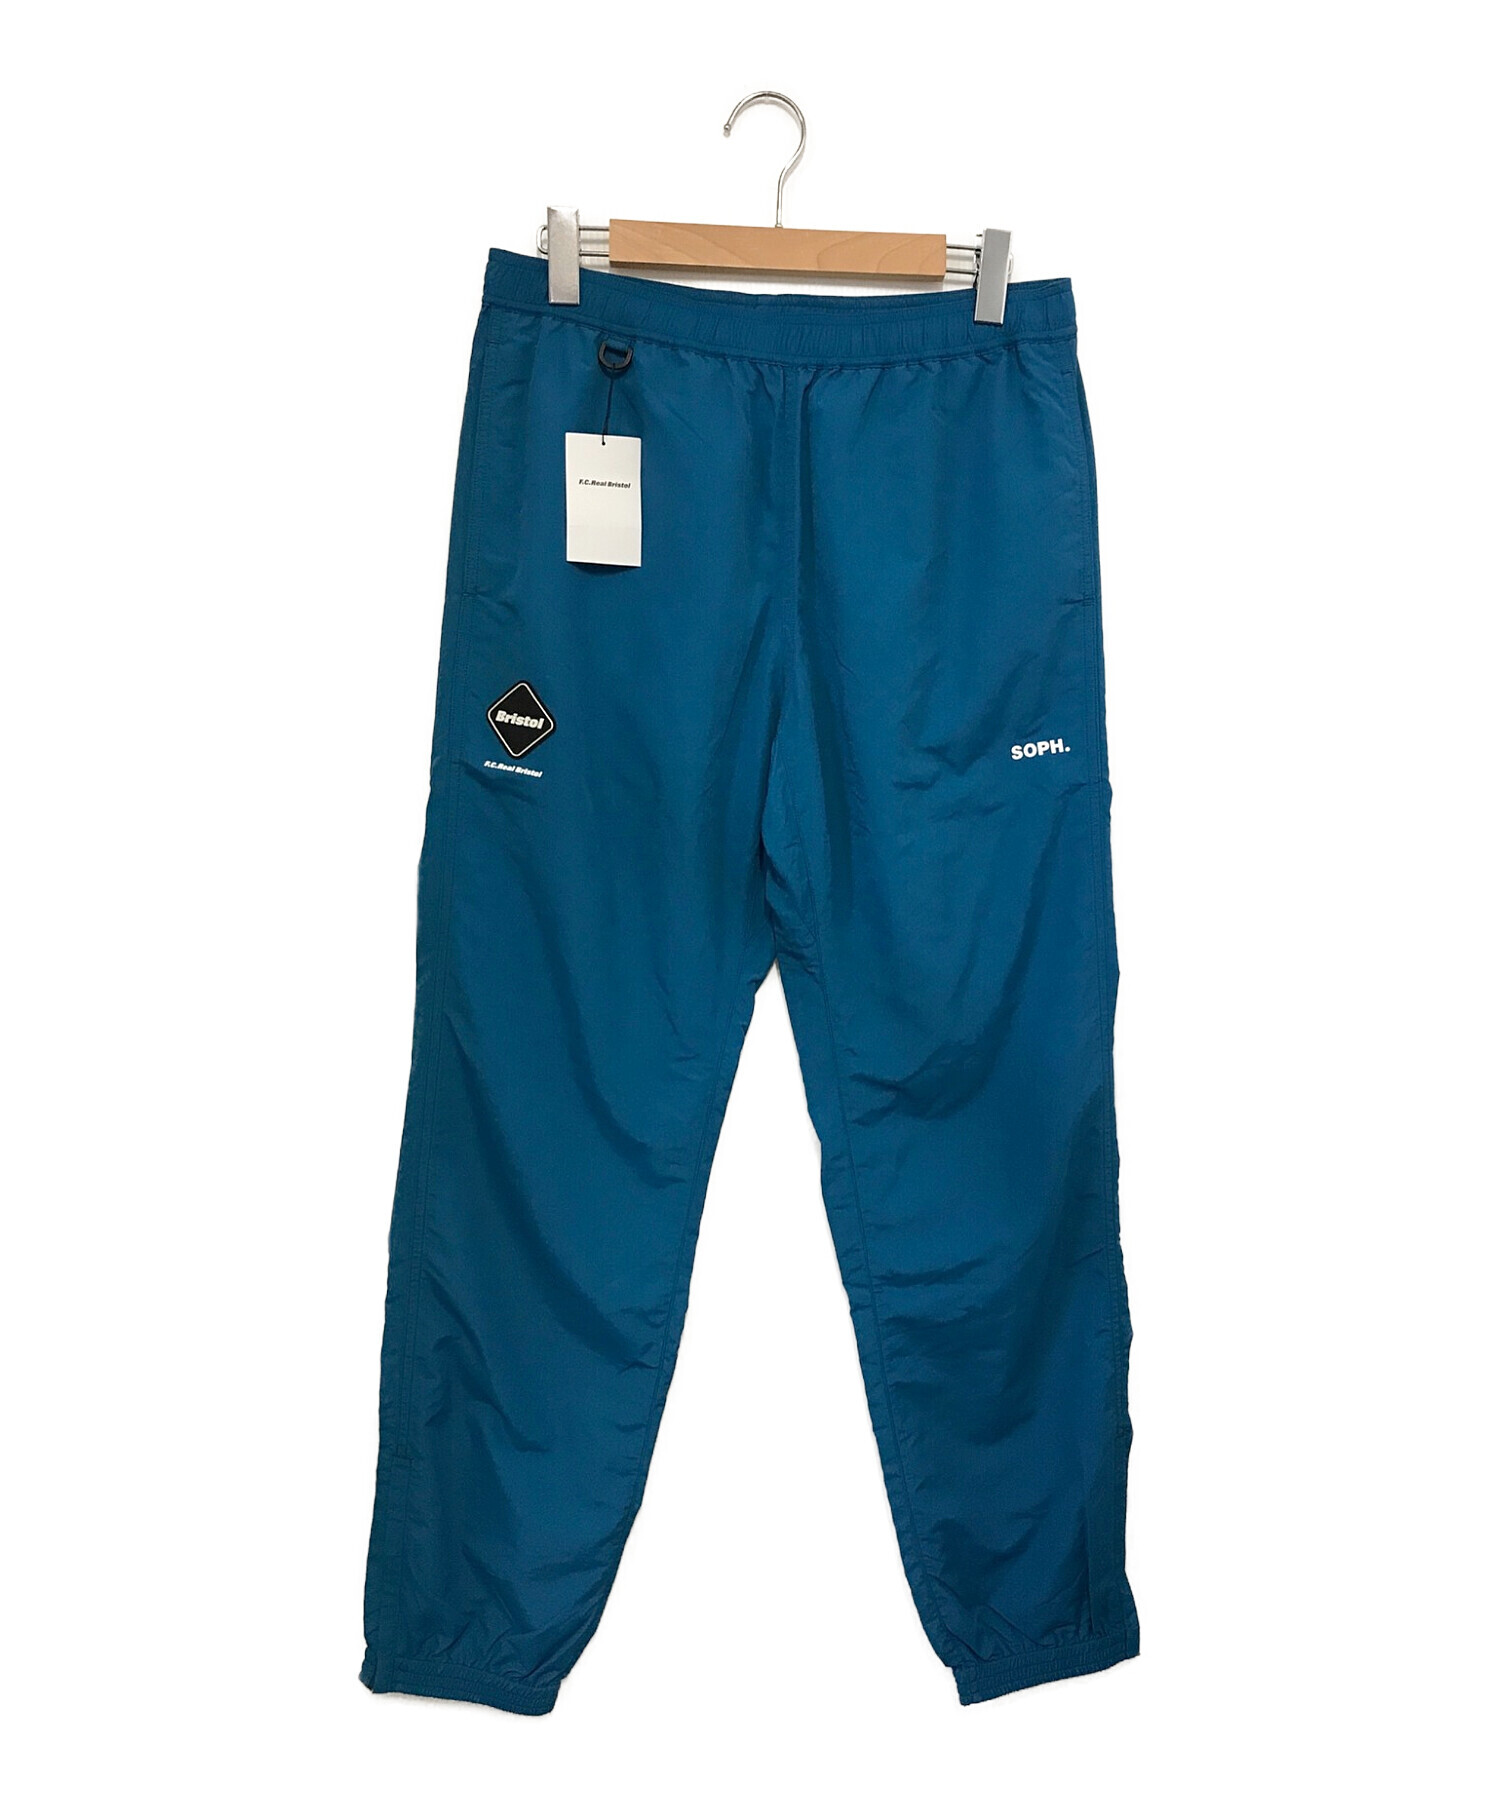 The North Face Women's TNF Nylon Easy Pants Size Large $90 Retail